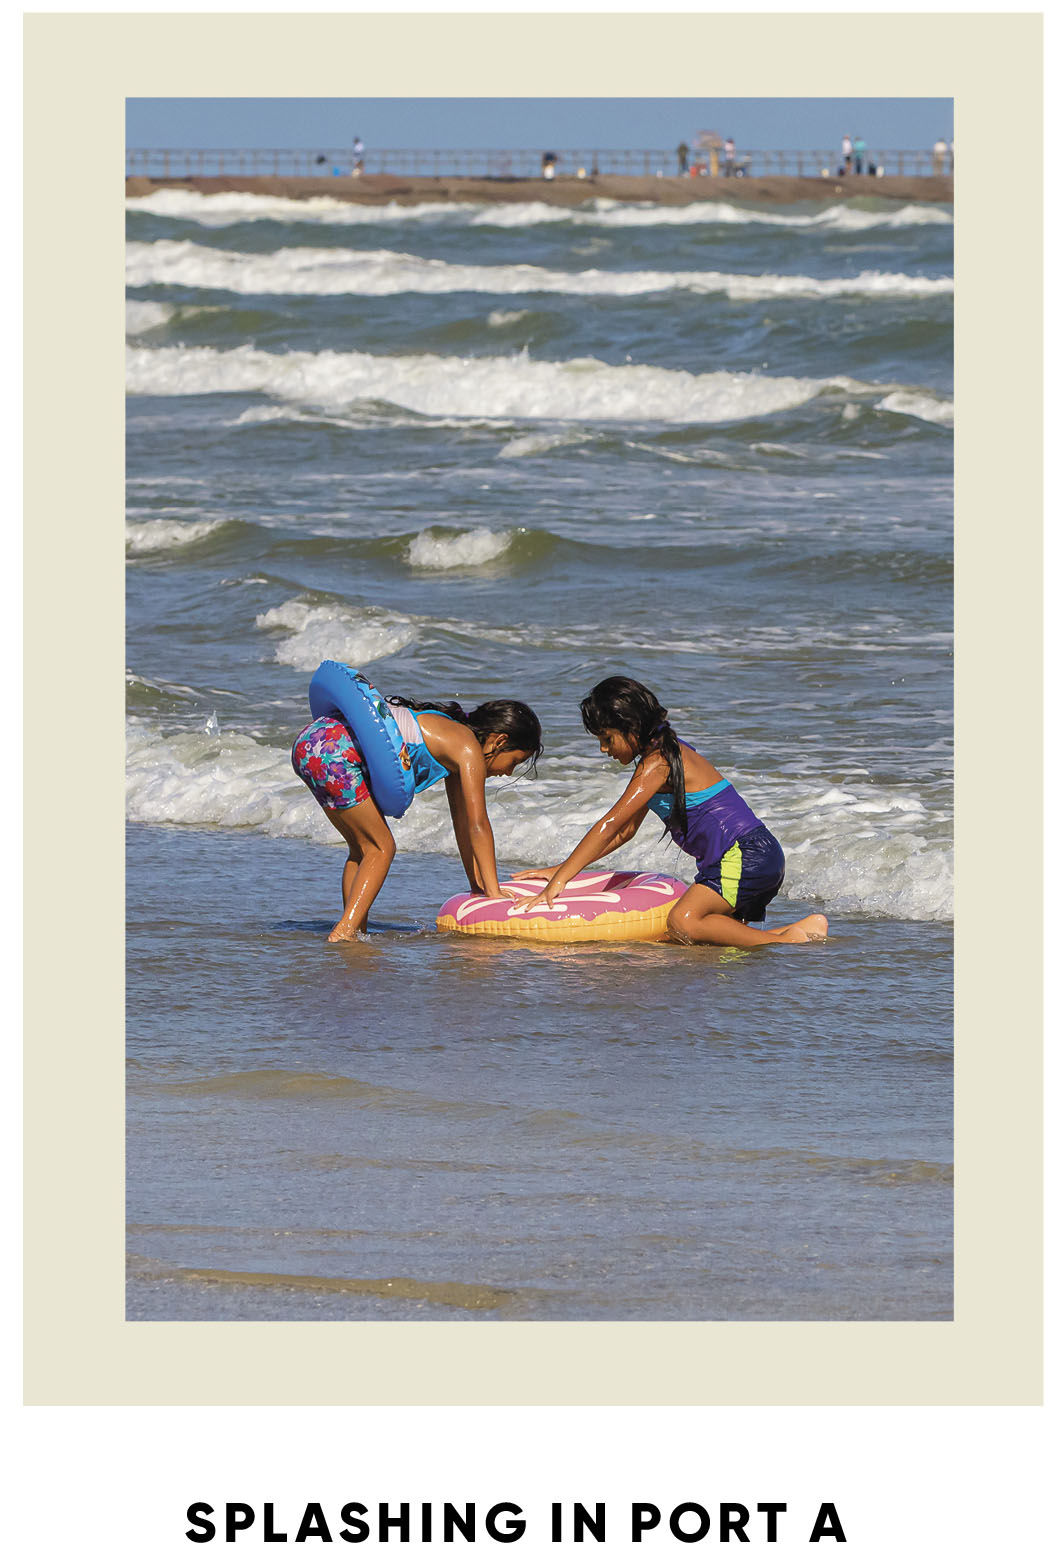 Two kids play in the waves in Port Aransas